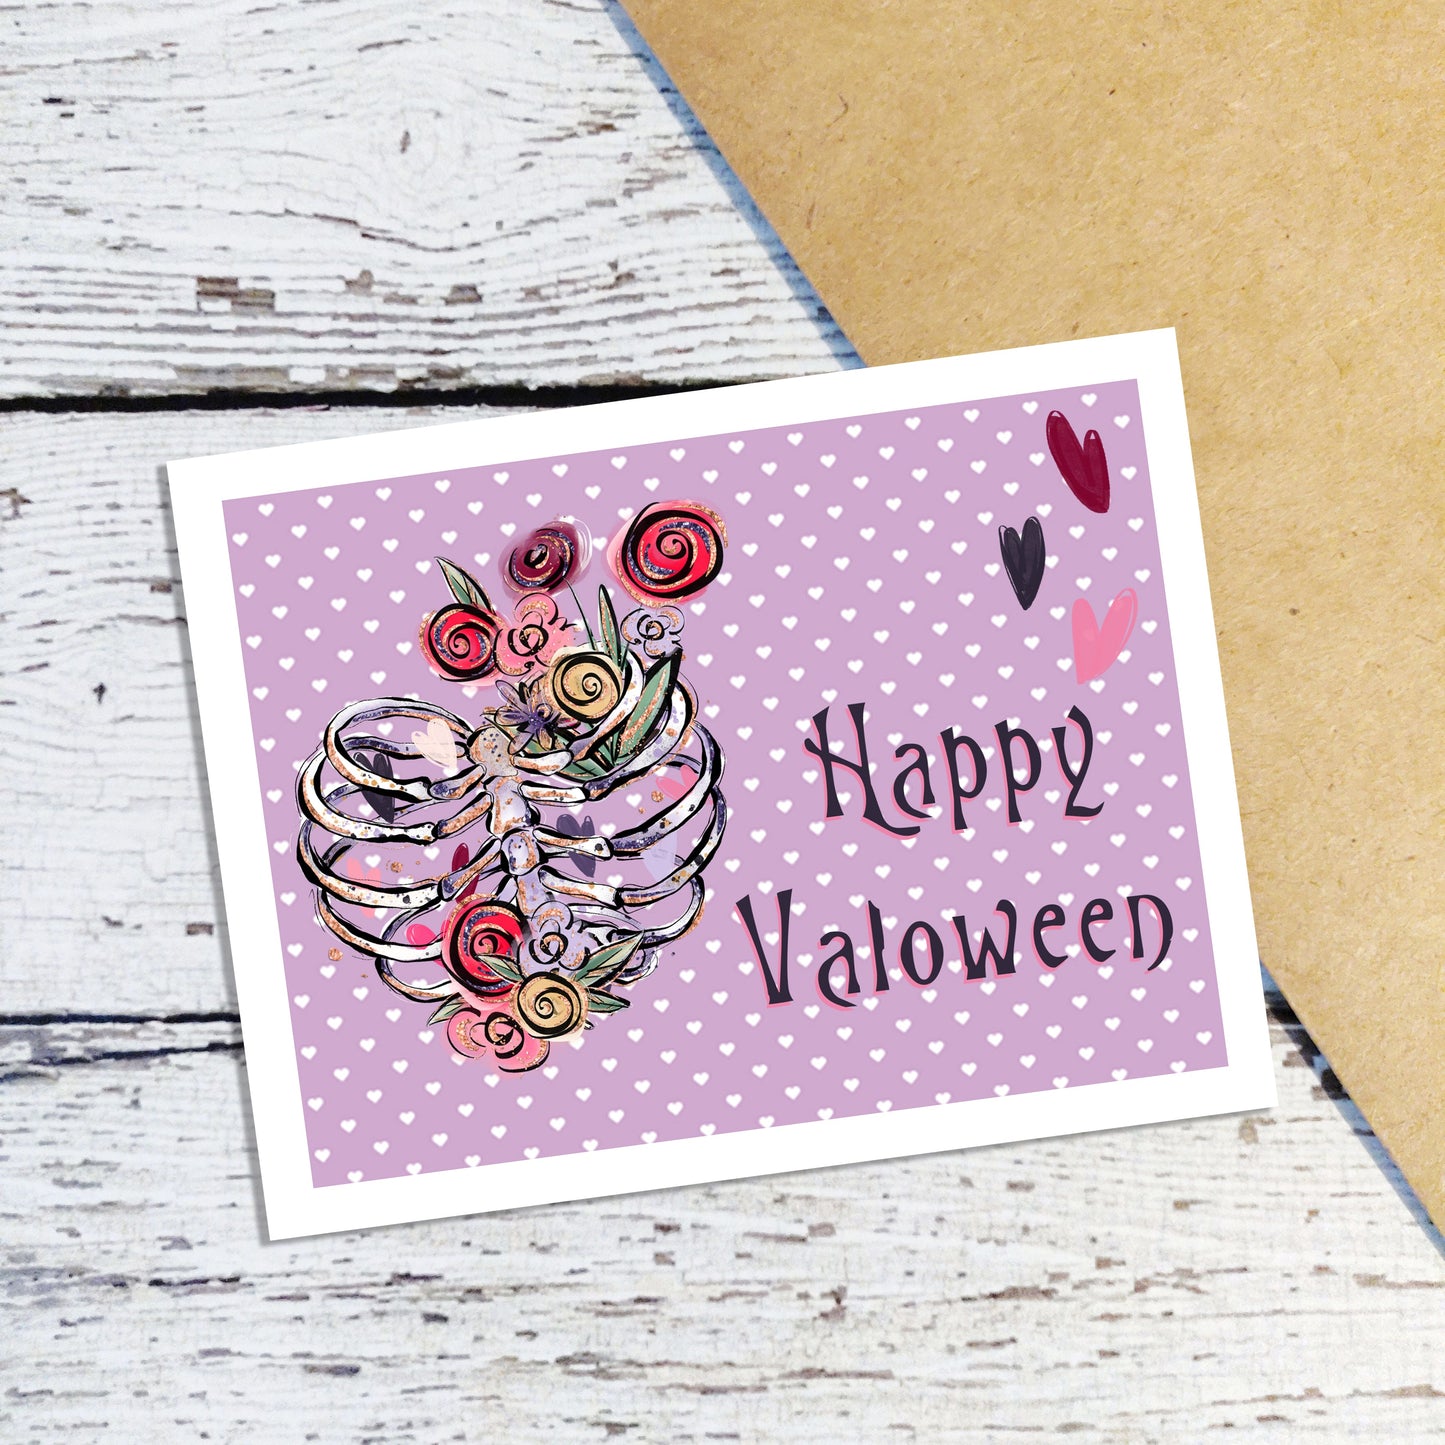 Valoween Note Cards